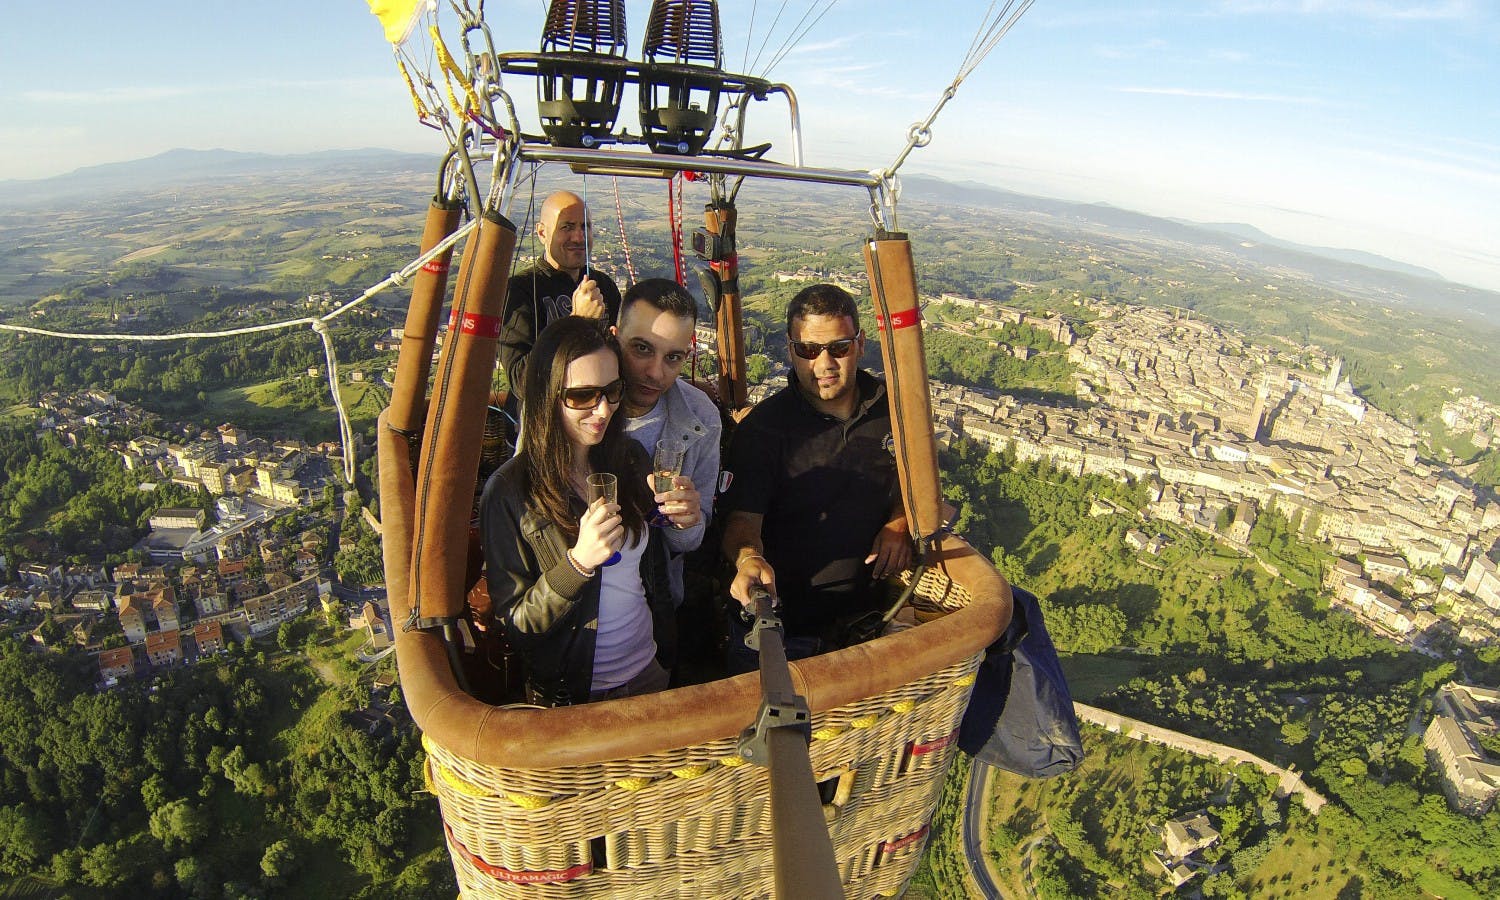 Hot air balloon rides over Siena in Tuscany